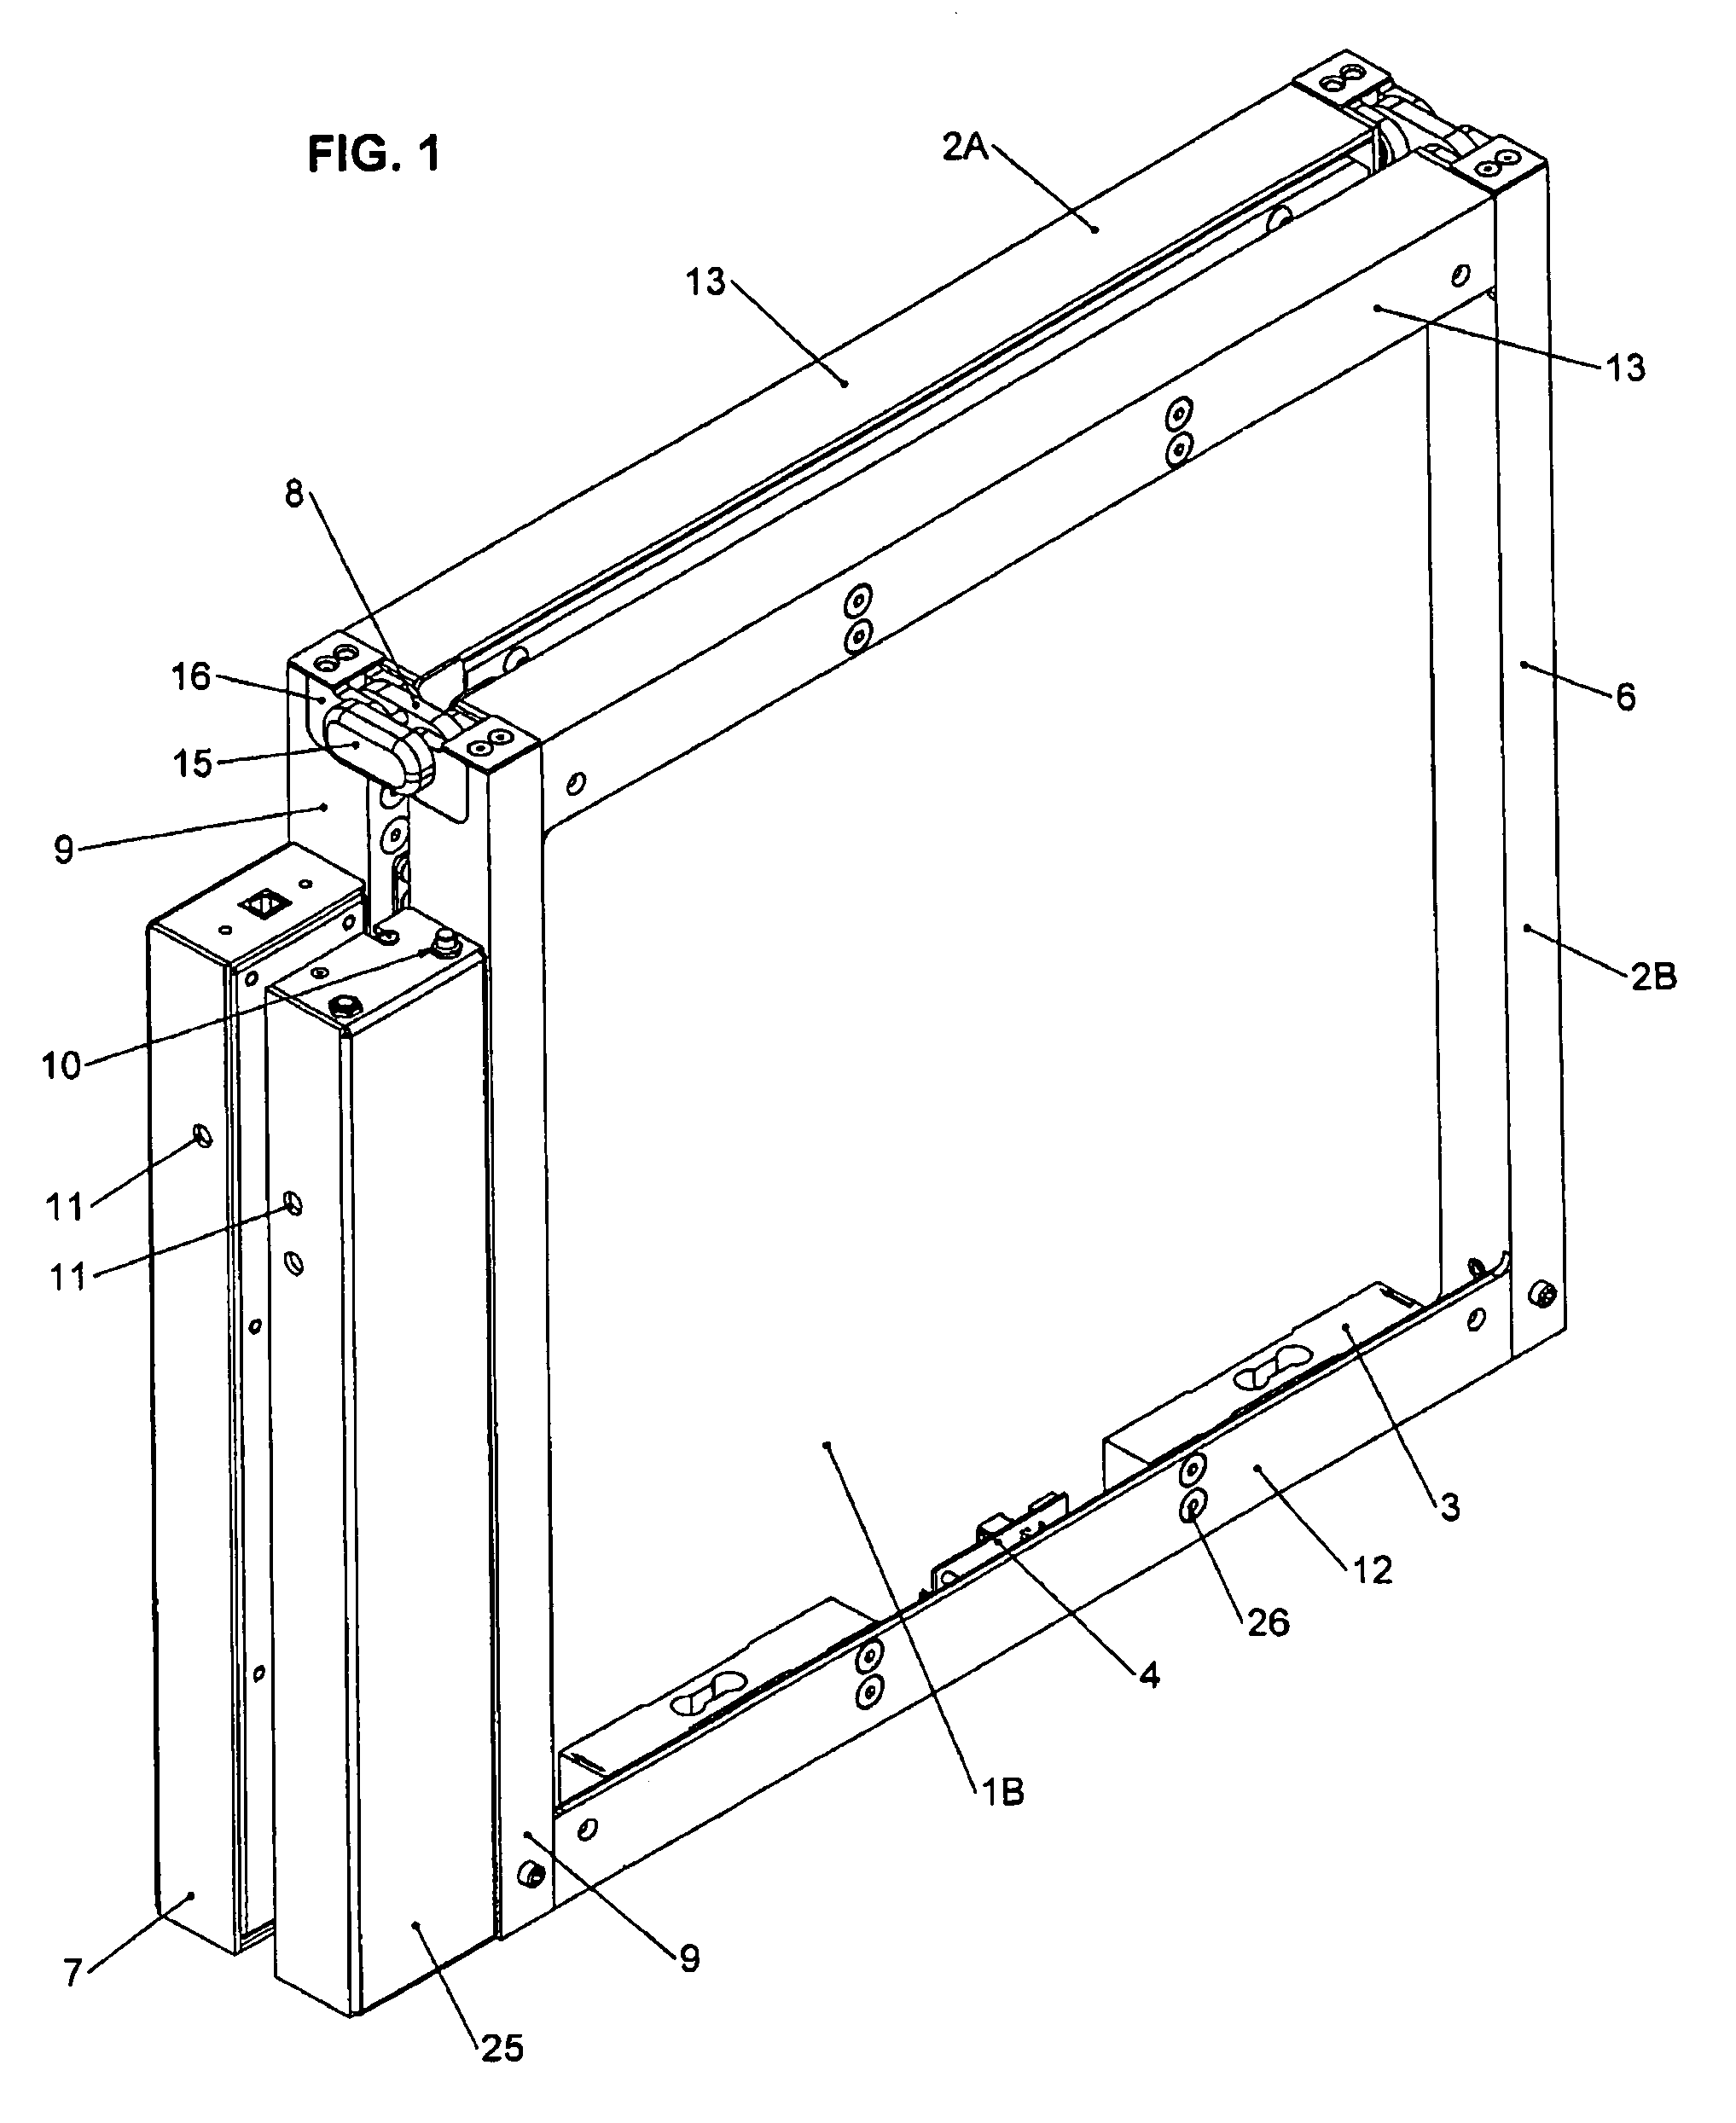 Dual force plate apparatus